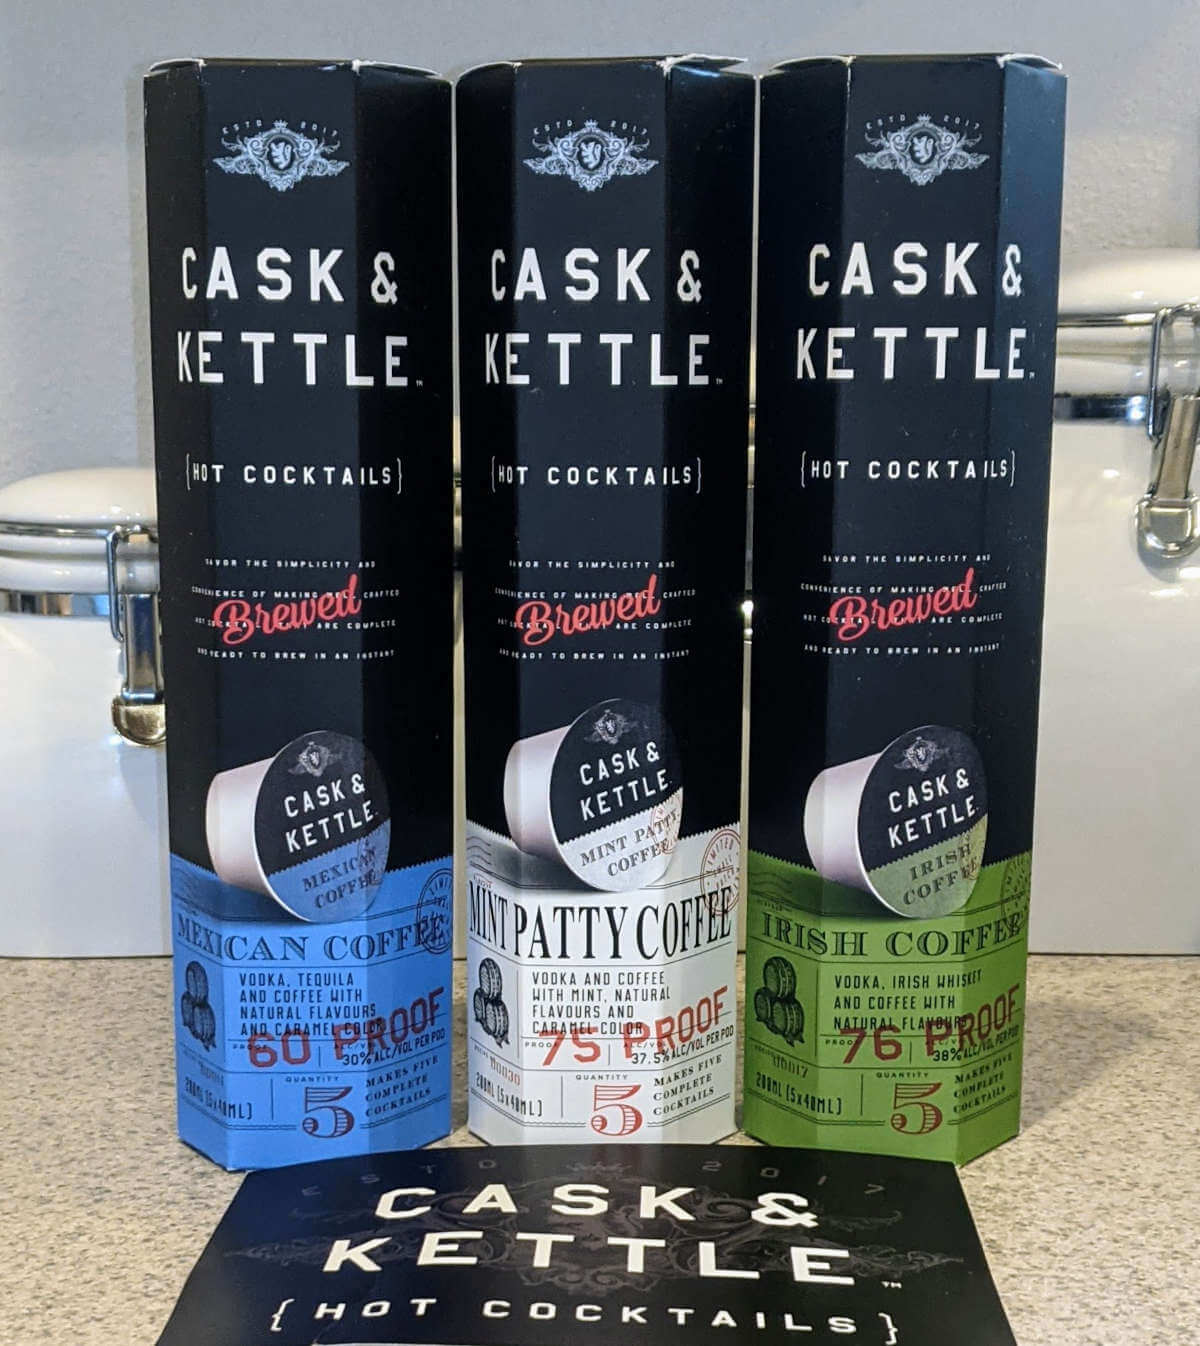 Received: Cask & Kettle hot cocktail mixes